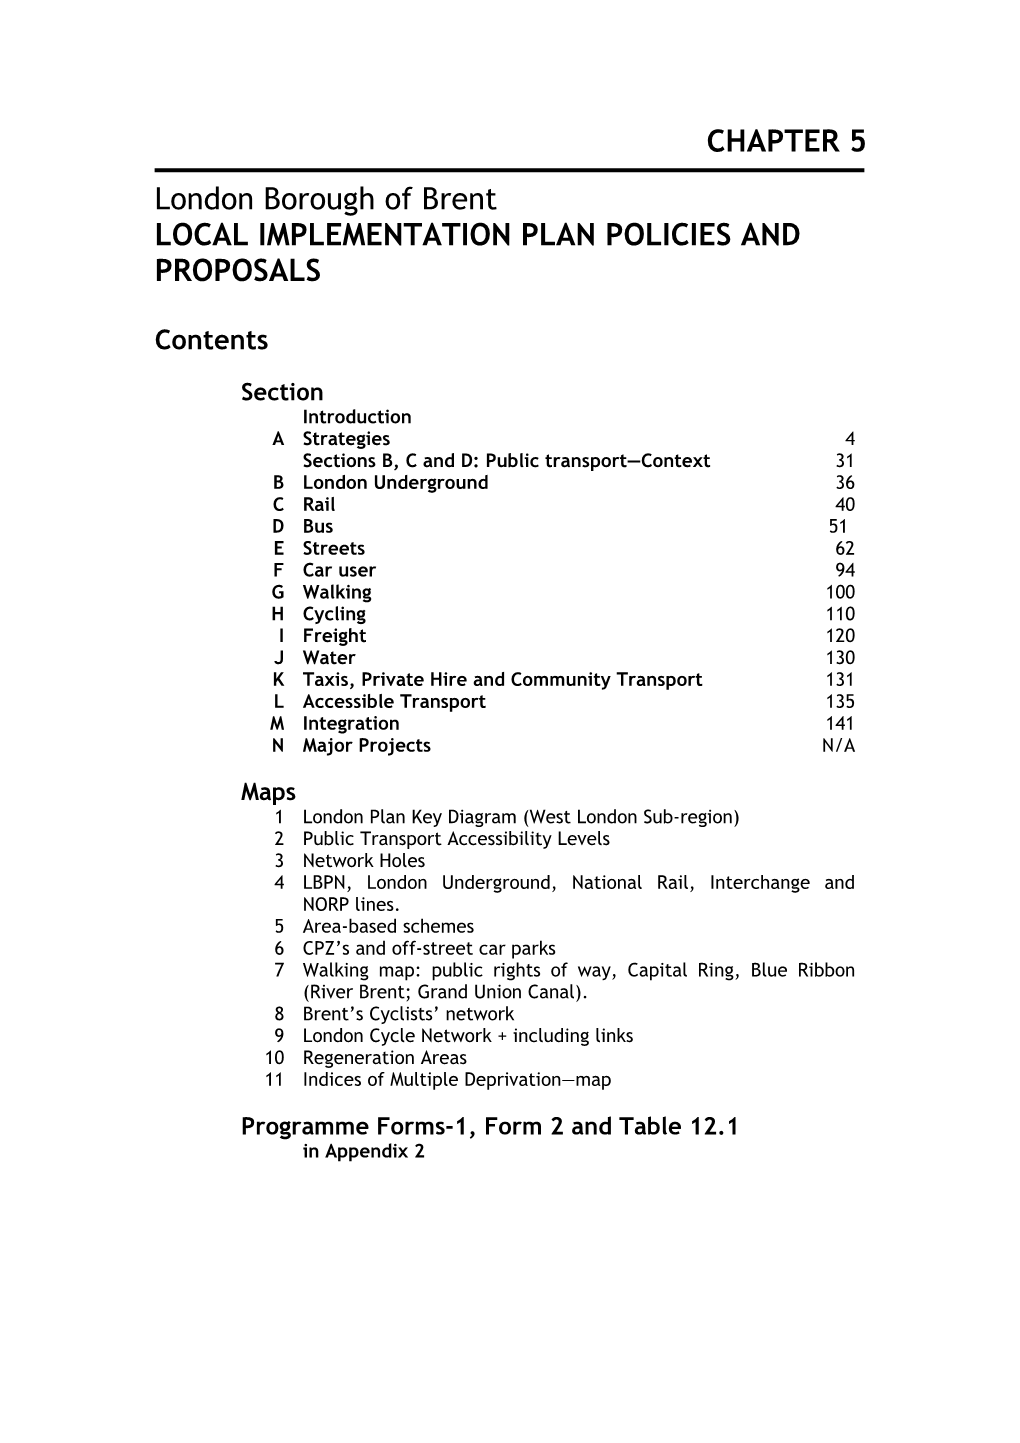 Brent Local Implementation Plan 2007